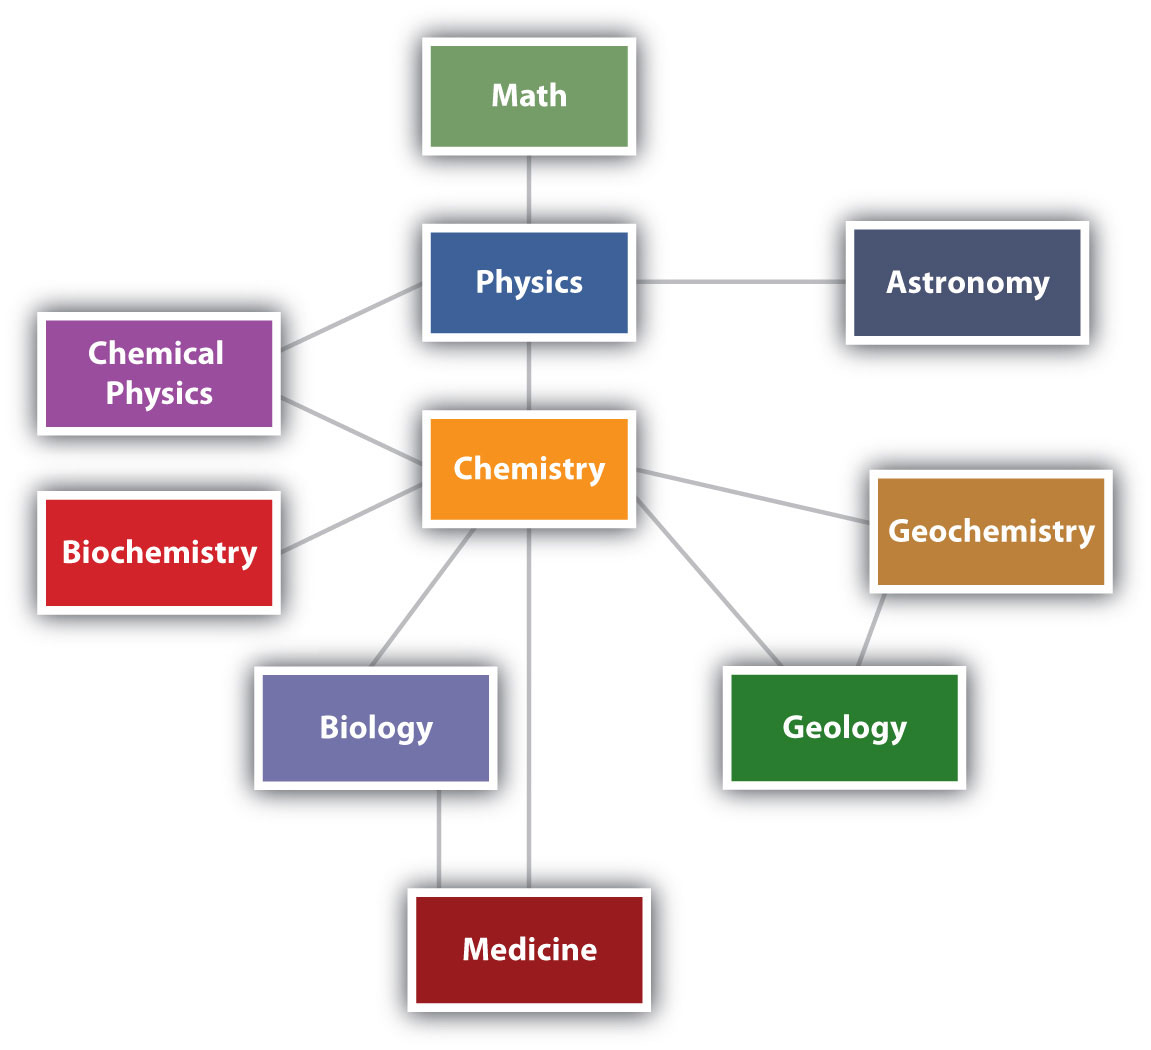 The Relationships between Some of the Major Branches of Science